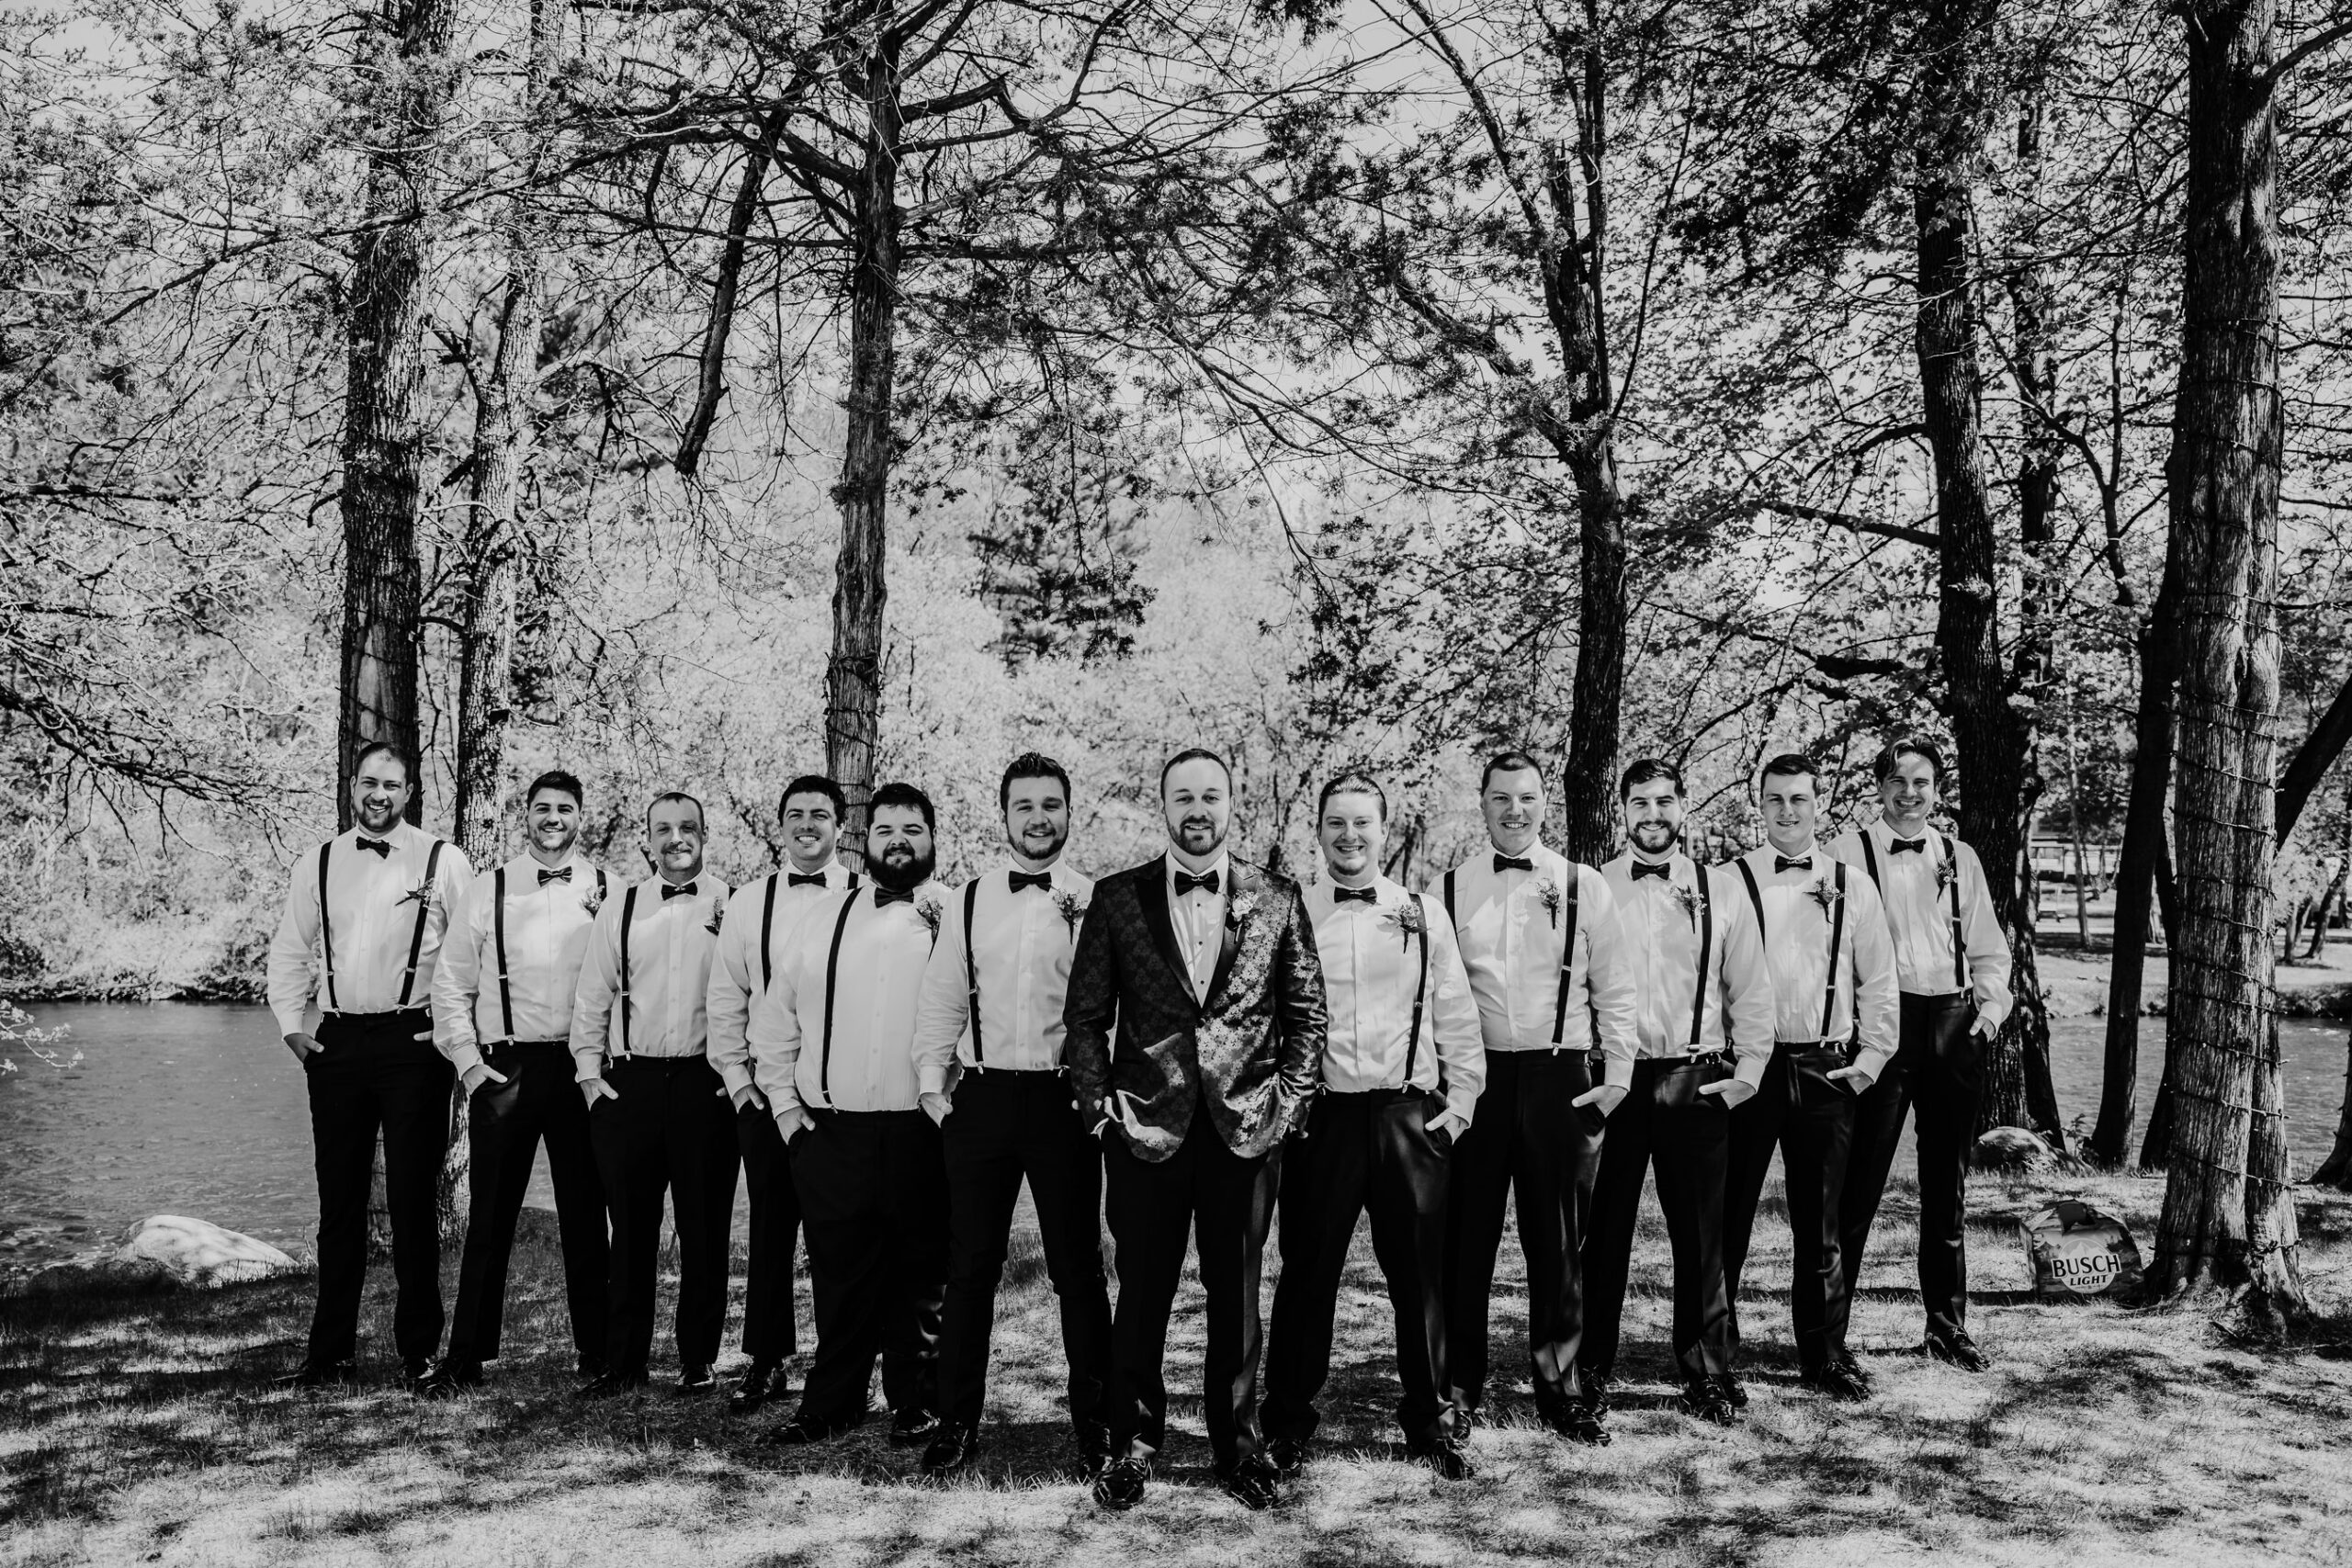 The groom and his Wisconsin groomsmen pose in their black suspenders and bowties. Groomsmen photos Bridal party portraits Groom outfit inspo #forestgreenwedding #rusticweddingvenue #weddingplanning #wisconsinweddingphotographer #wisconsinweddingvenue